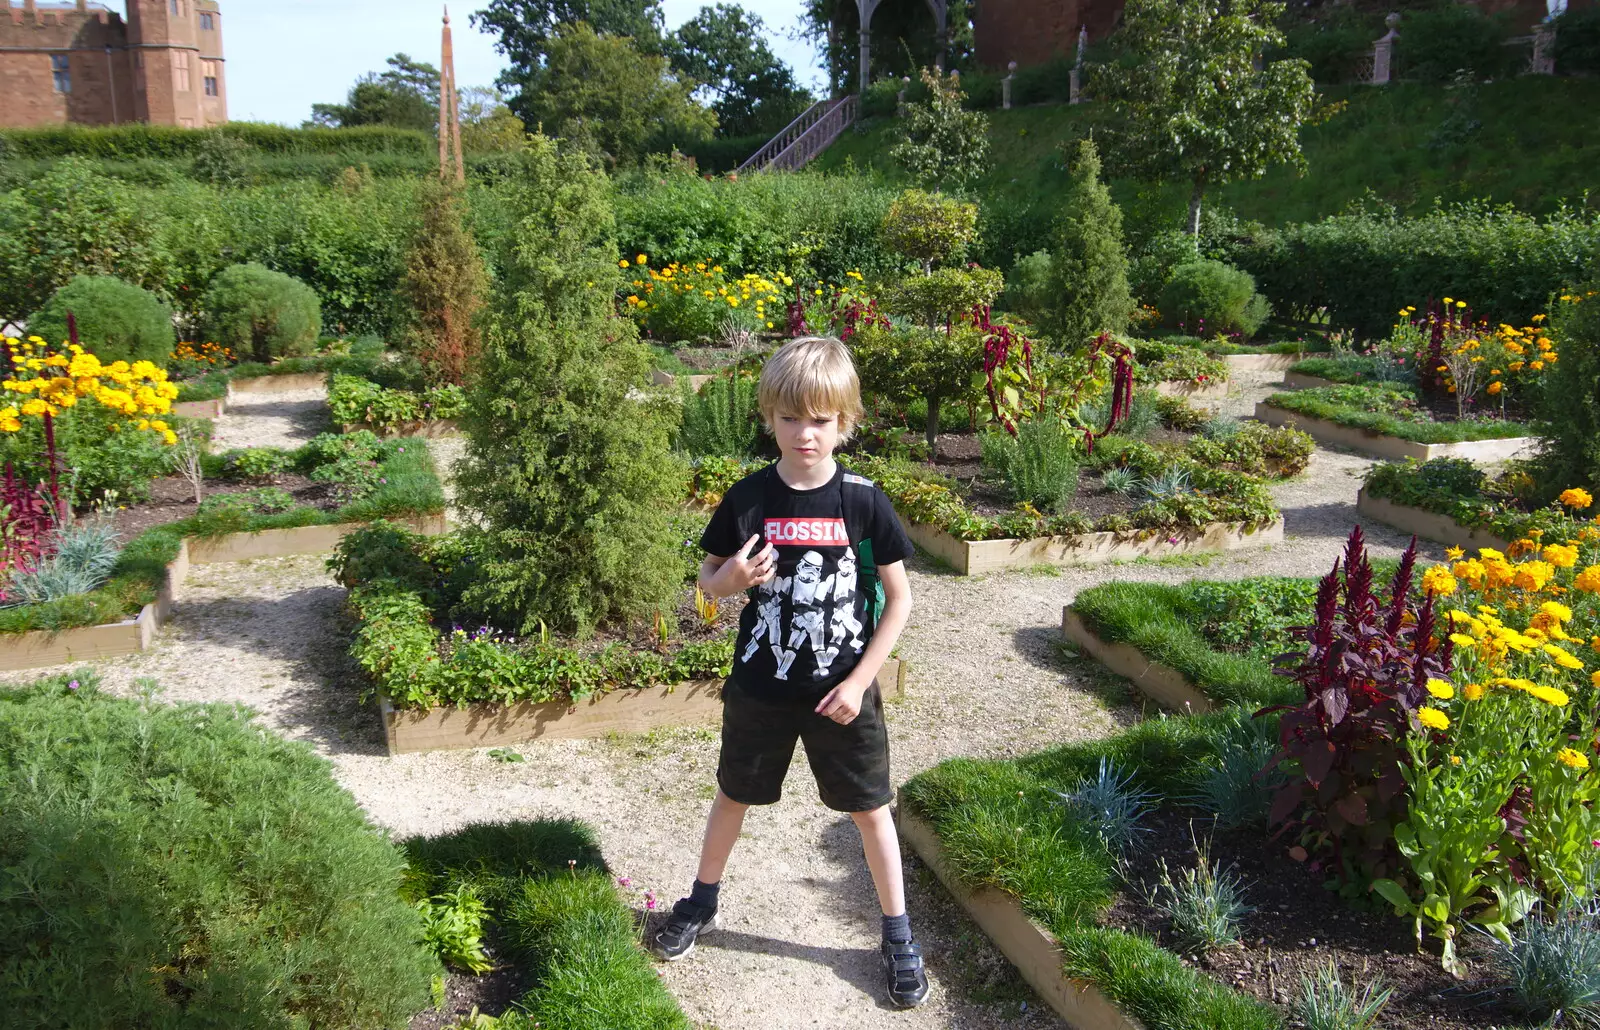 Harry in the garden, from Kenilworth Castle and the 69th Entry Reunion Dinner, Stratford, Warwickshire - 14th September 2019